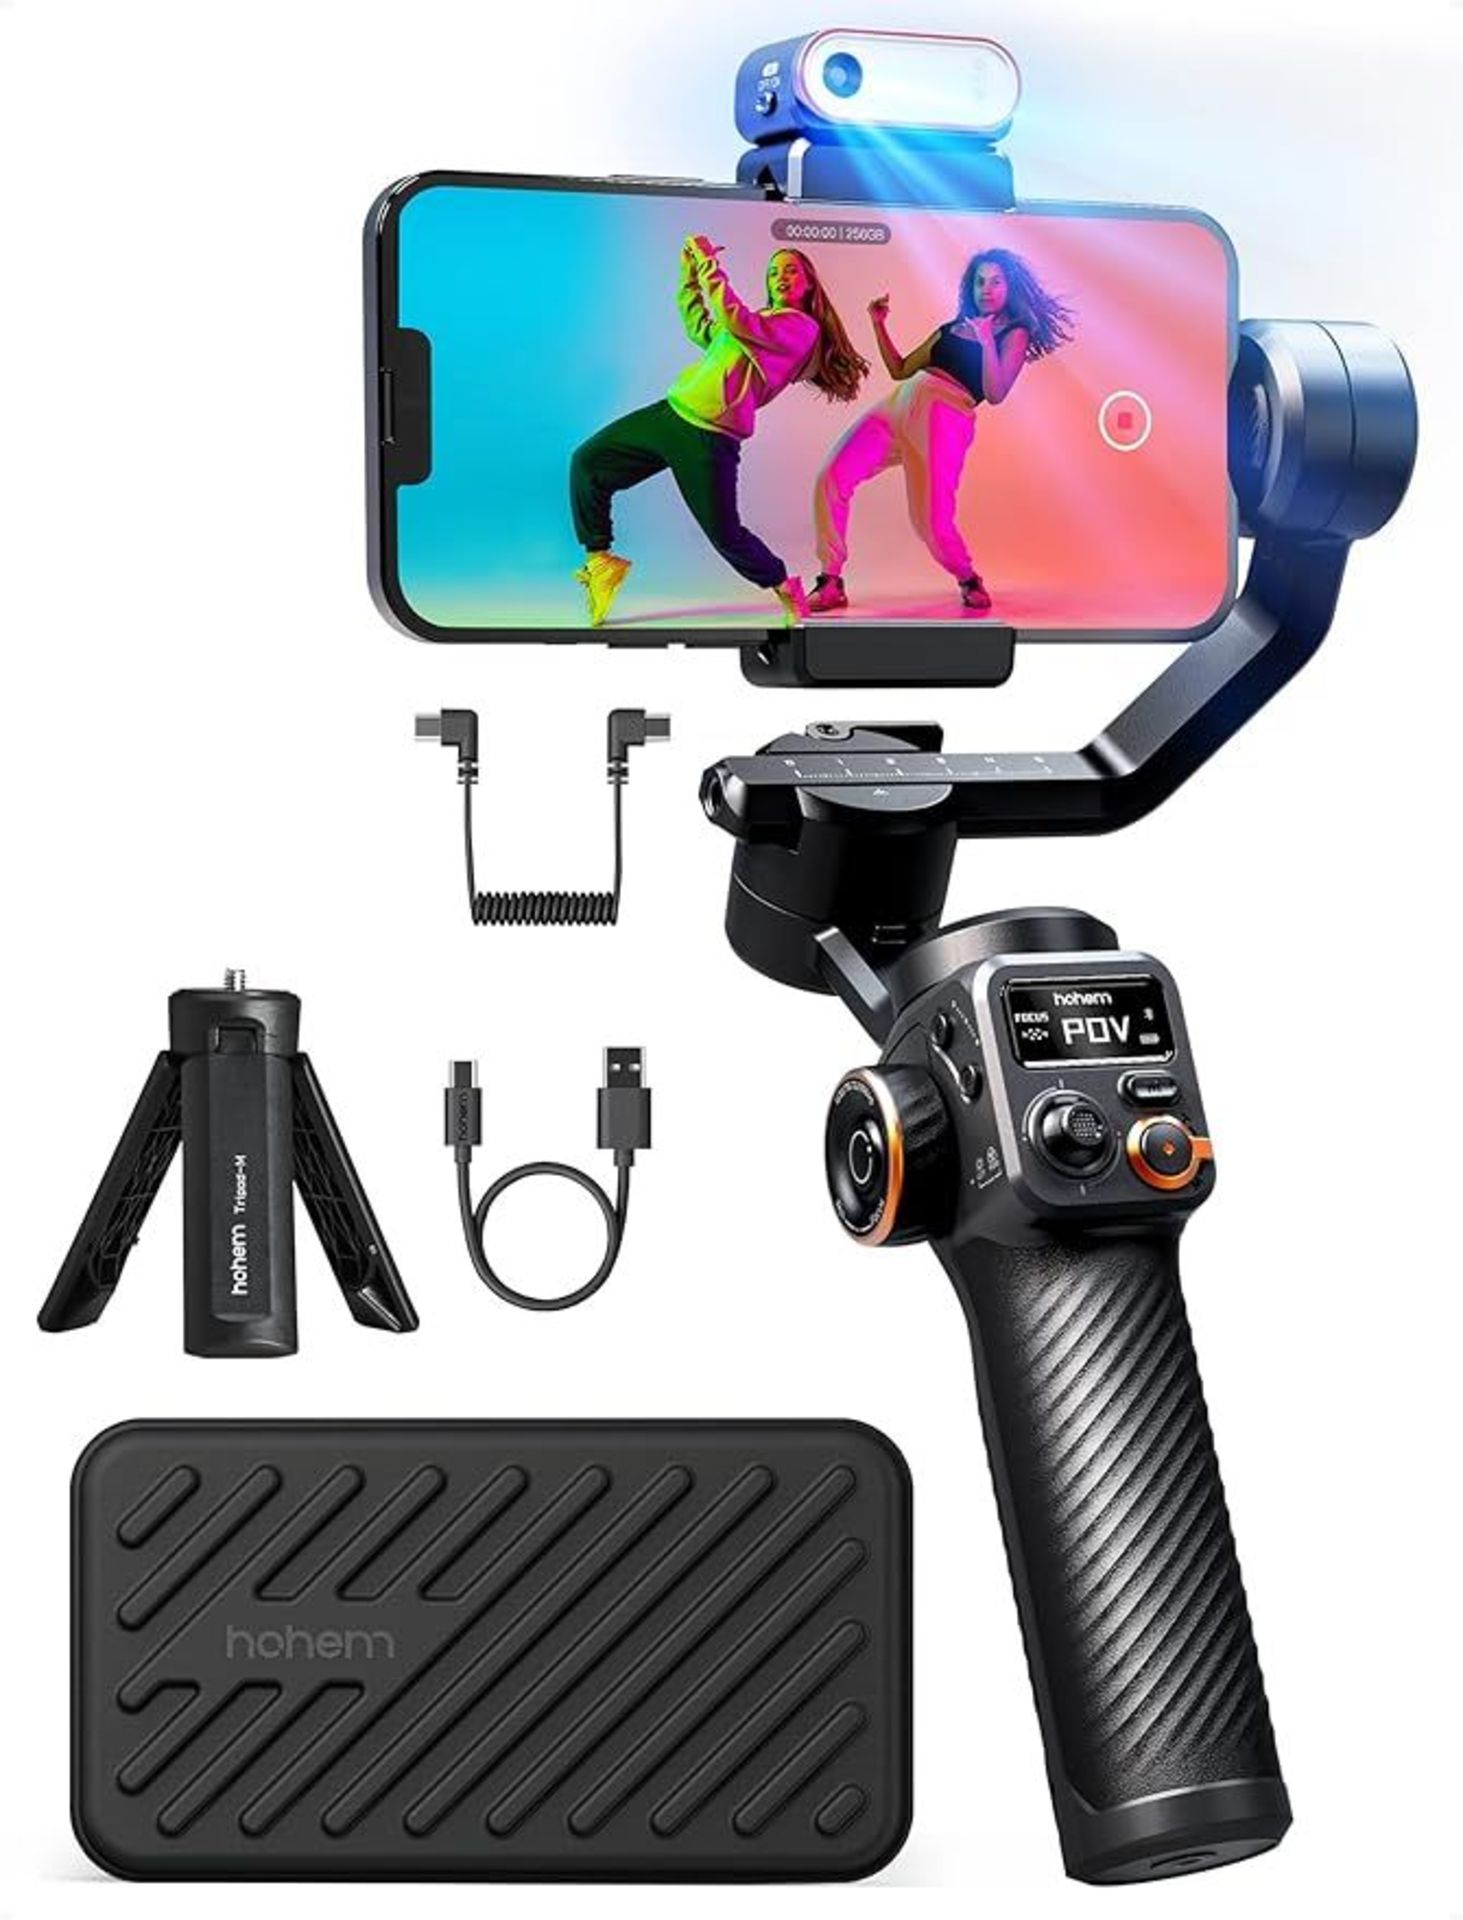 hohem iSteady M6 kit Gimbal Stabilizer for Smartphone, Upgraded 3-Axis Phone Gimbal, AI Tracker w/